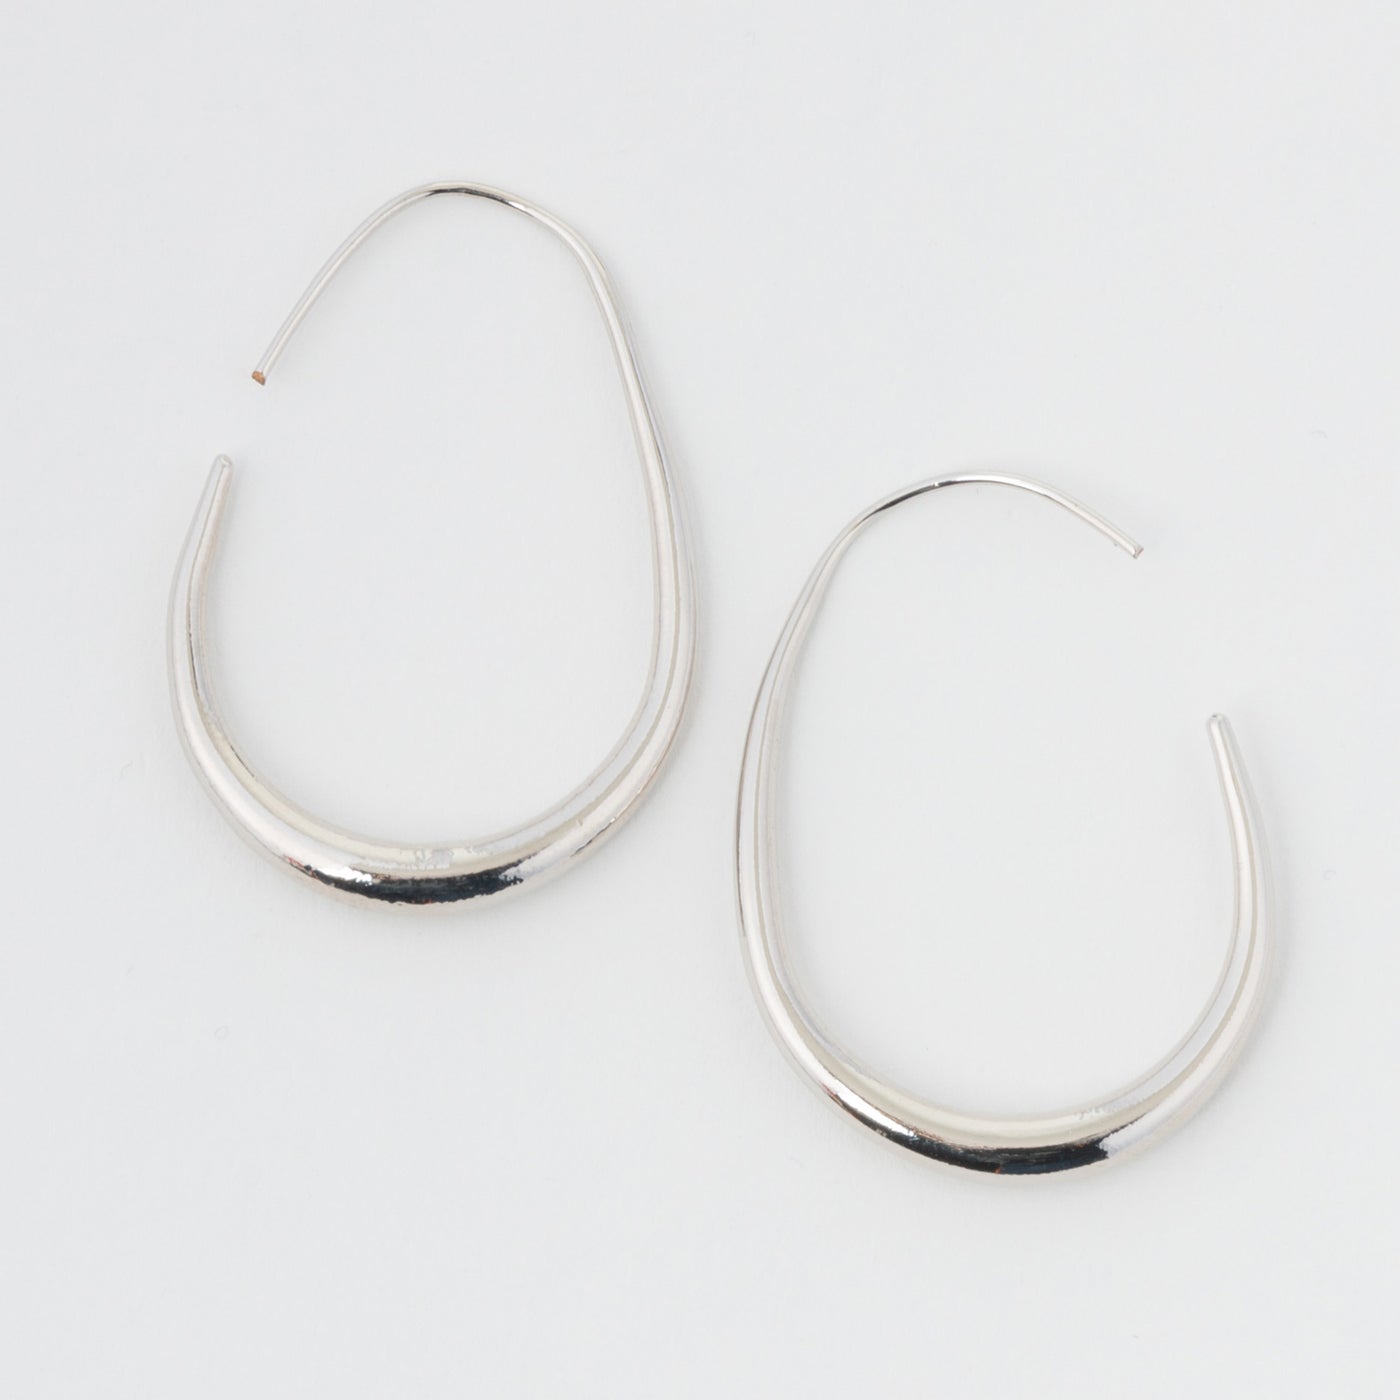 silver oval hoops on a white background.